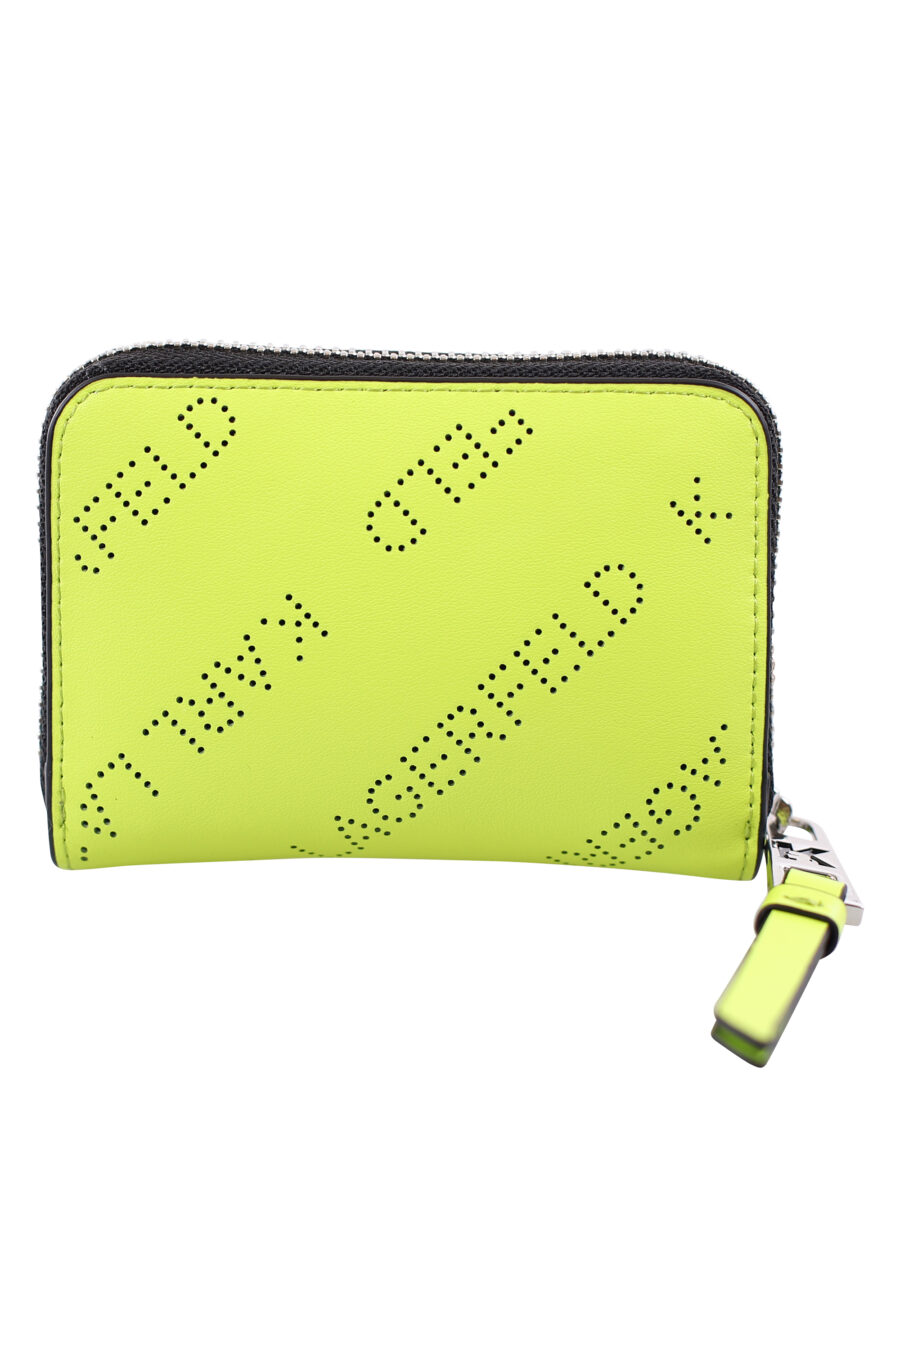 Lime green small wallet with perforated logo and zip - IMG 1816